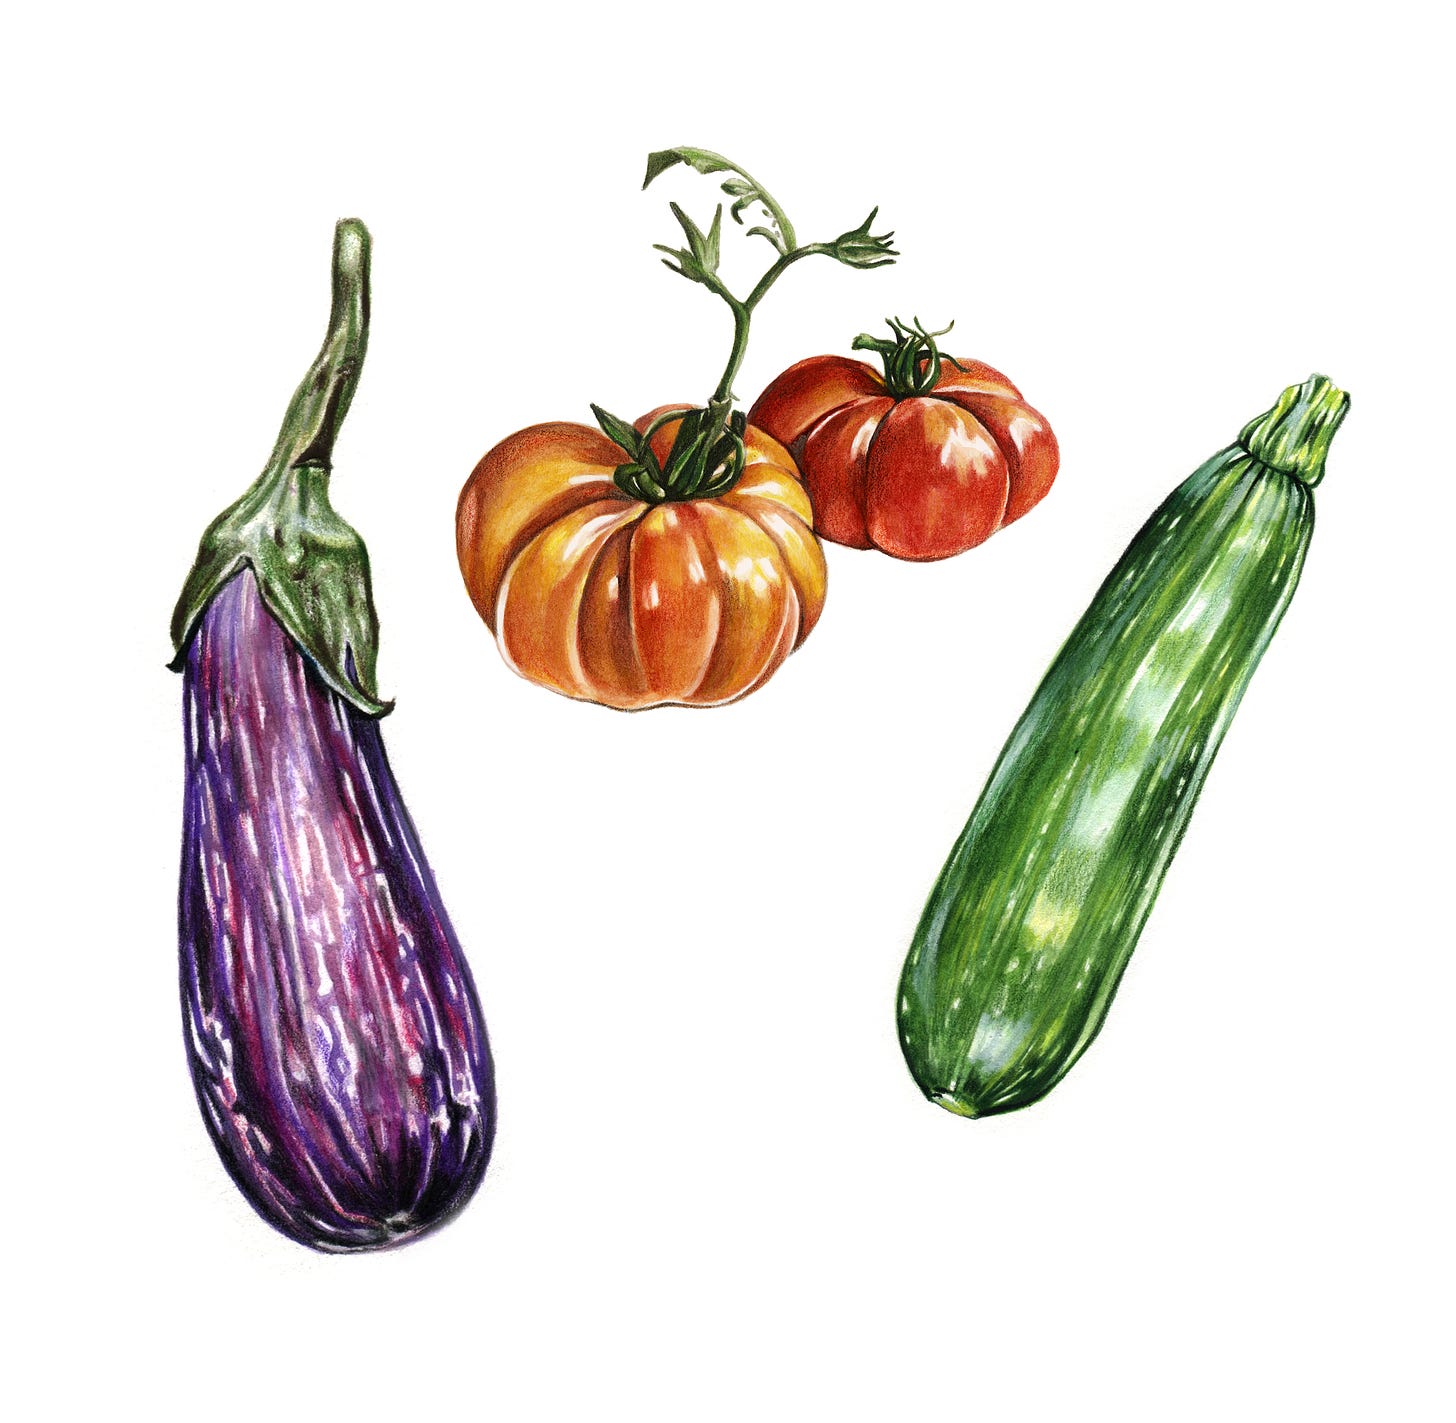 A watercolor painting of a purple eggplant, two red tomatoes on the vine, and a green zucchini, all centered next to one another